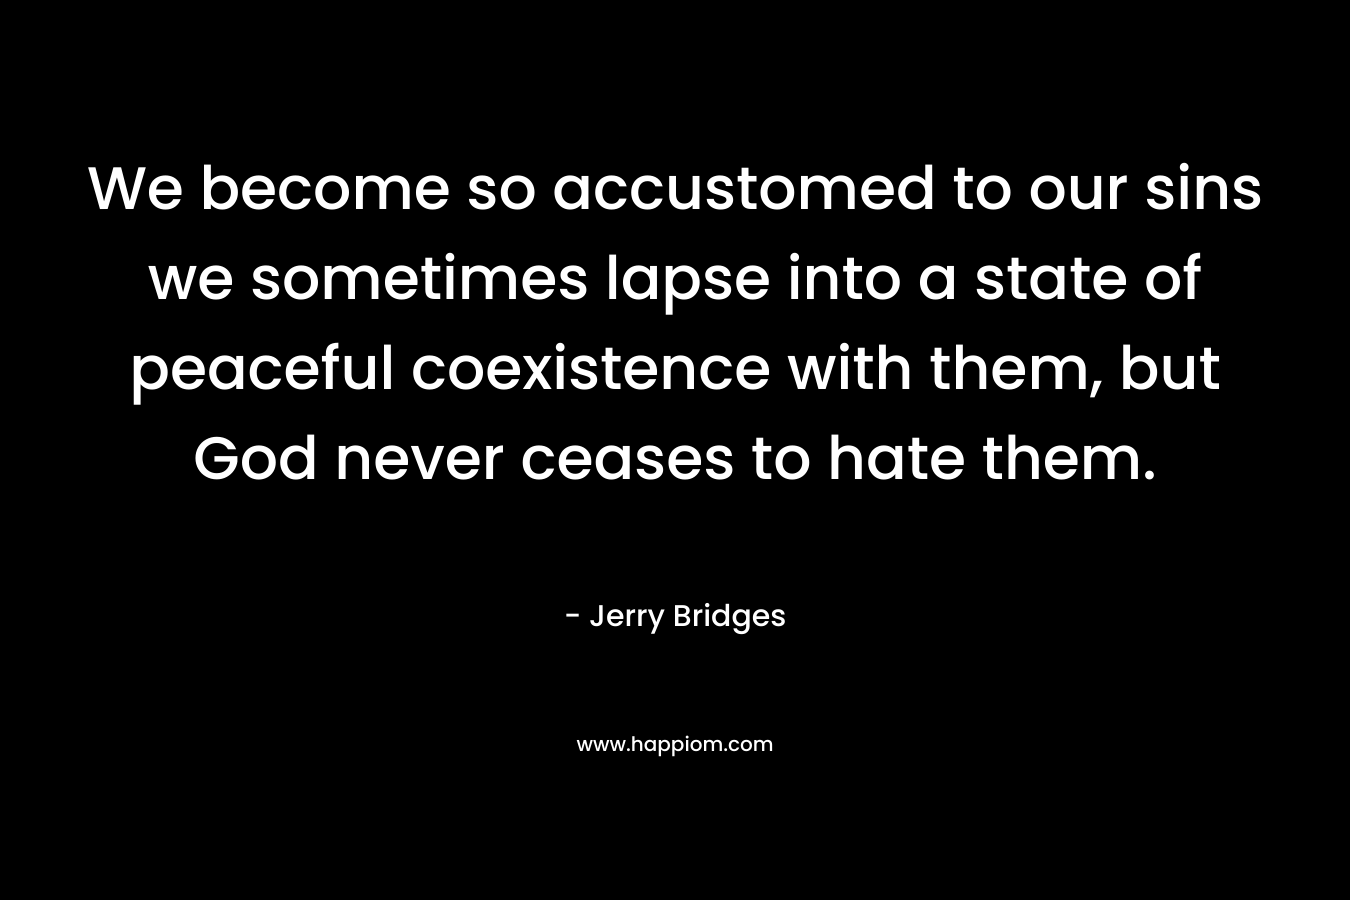 We become so accustomed to our sins we sometimes lapse into a state of peaceful coexistence with them, but God never ceases to hate them. – Jerry Bridges